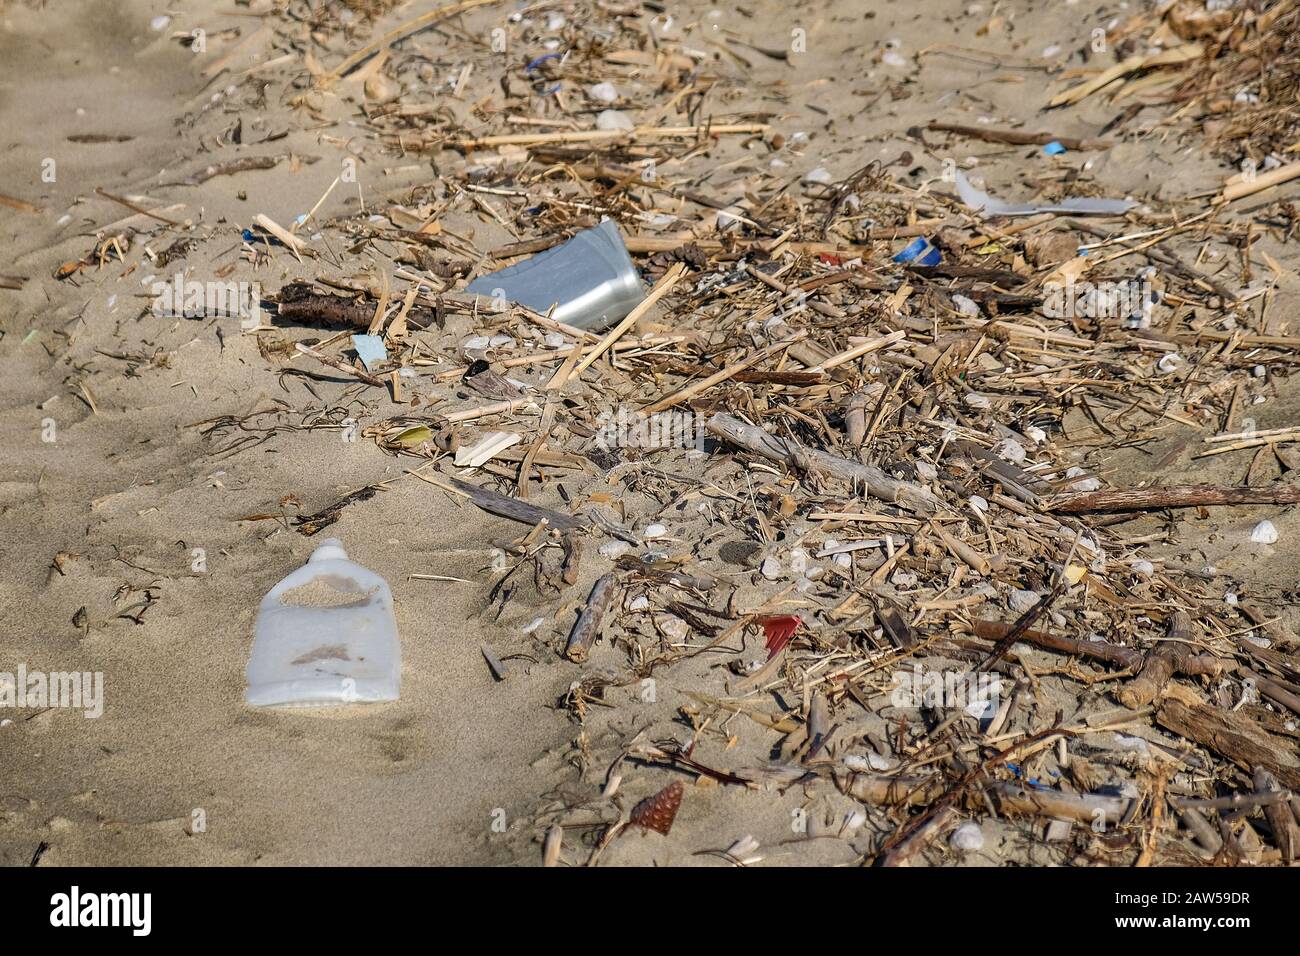 Industrial plastic Garbage pollution after winter sea storm coast,nature damage Stock Photo